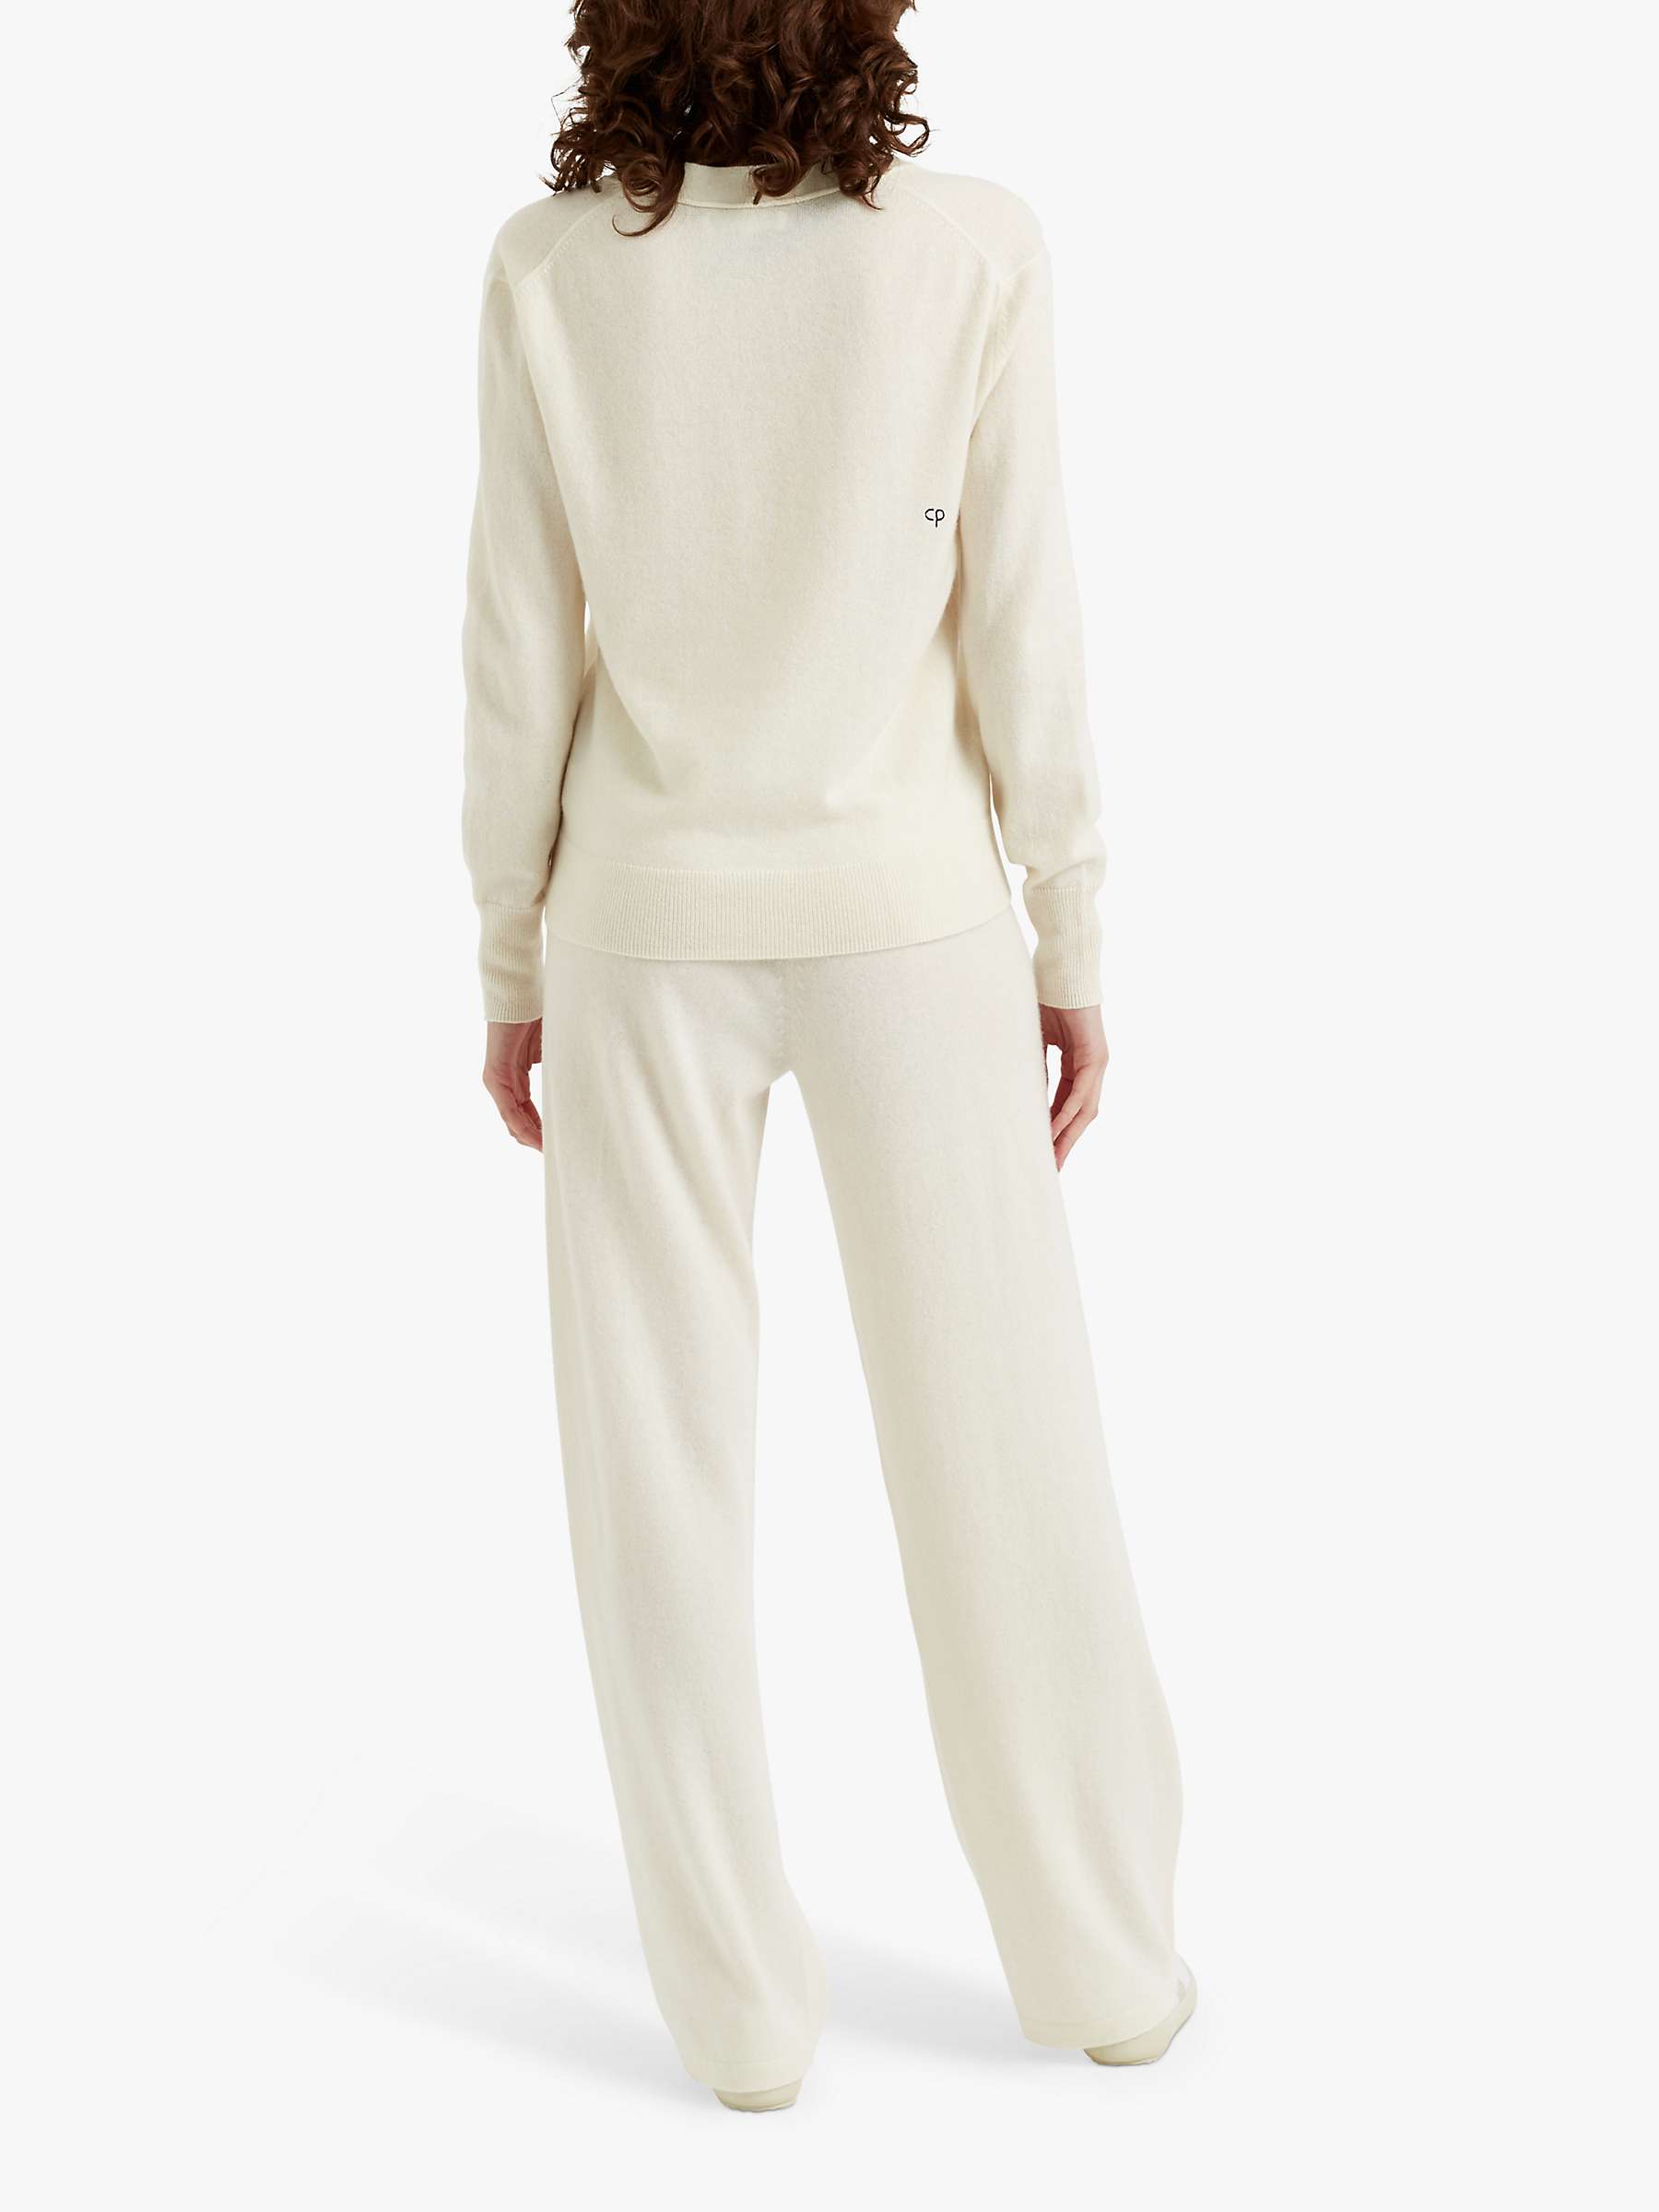 Buy Chinti & Parker Cashmere Cardigan Online at johnlewis.com